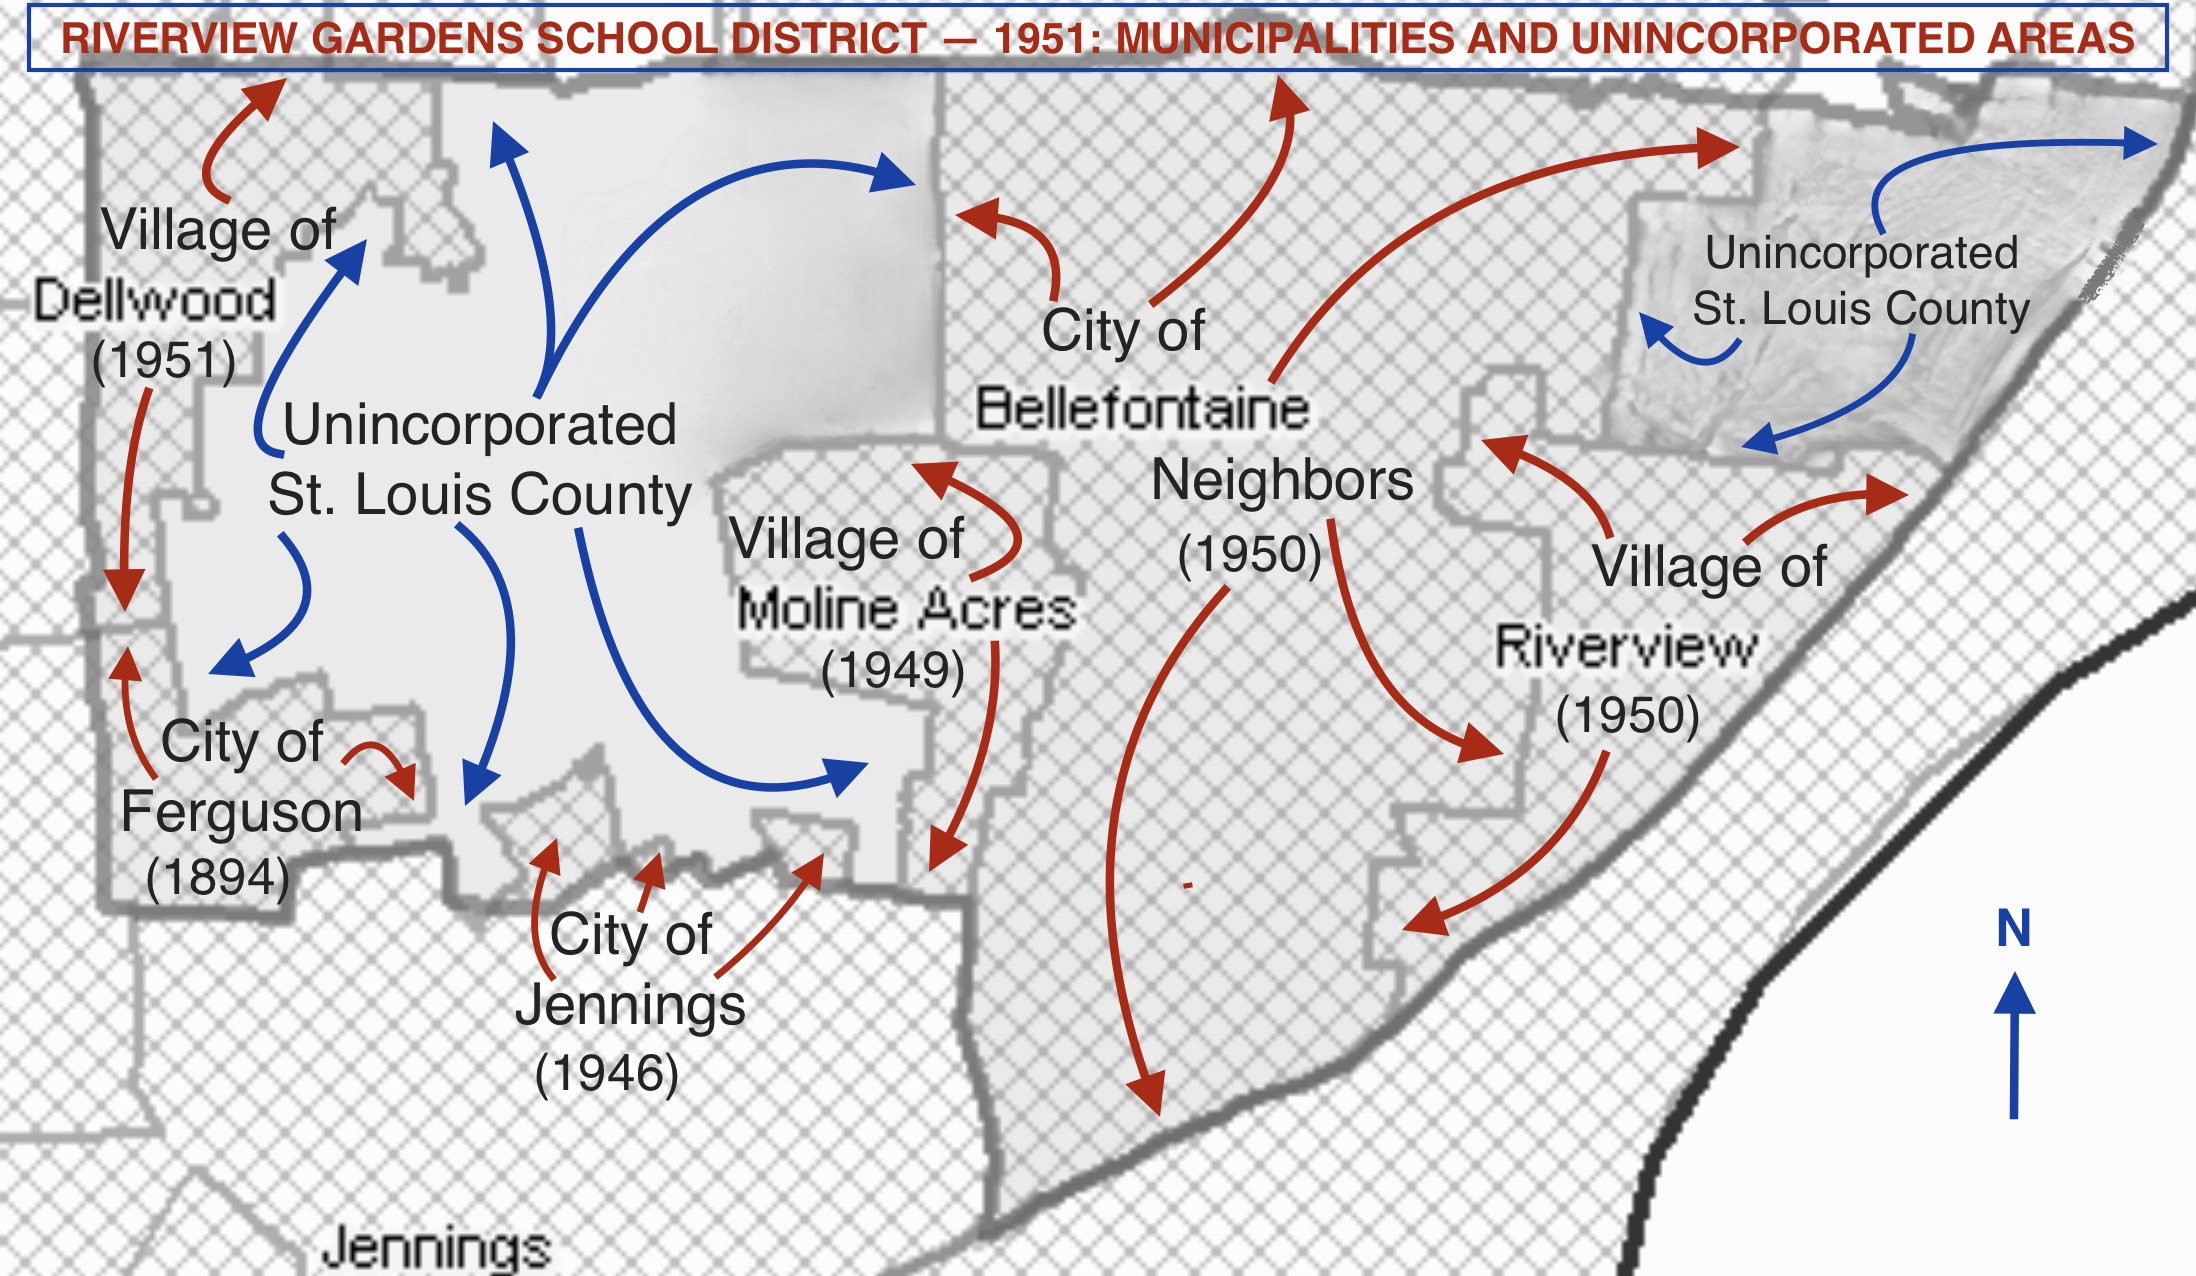 RIVERVIEW  GARDENS SCHOOL DISTRICT - 1951: MUNICIPALITIES AND UNINCORPORATED AREAS.